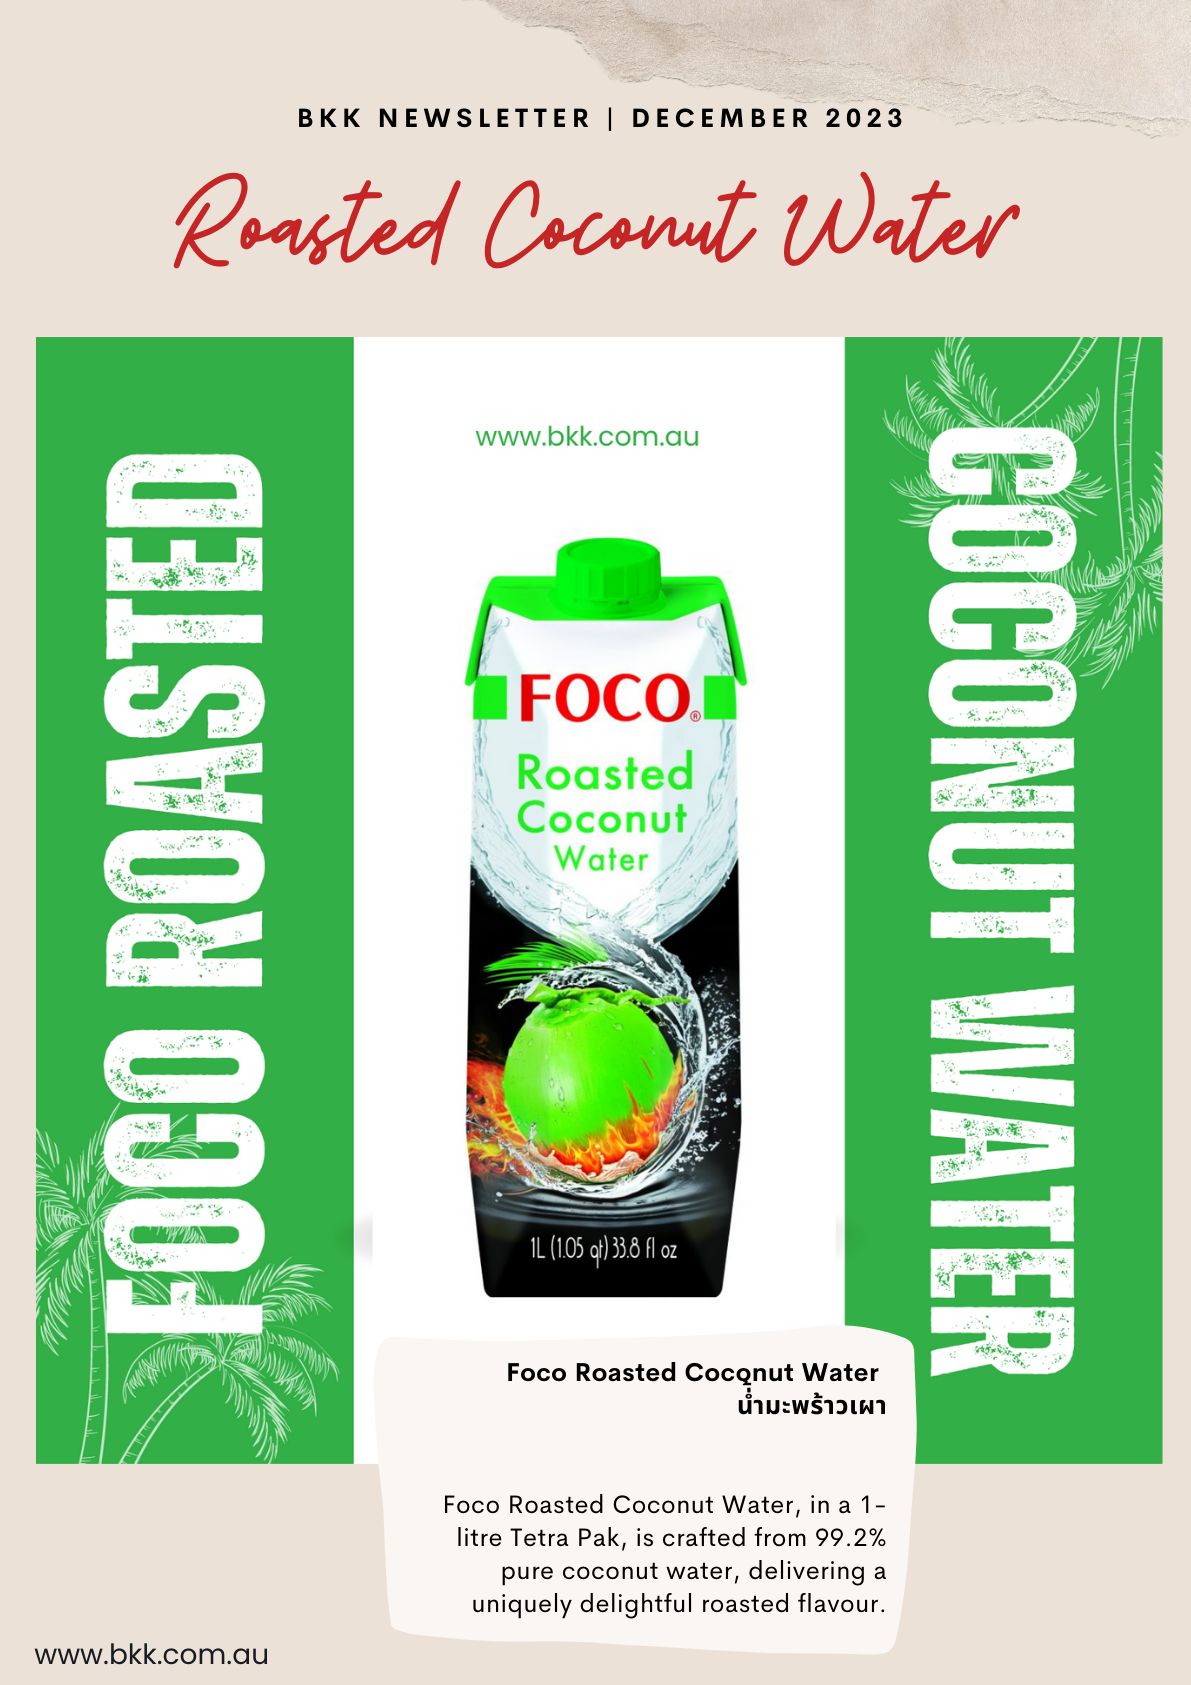 image presents Foco Roasted Coconut Water